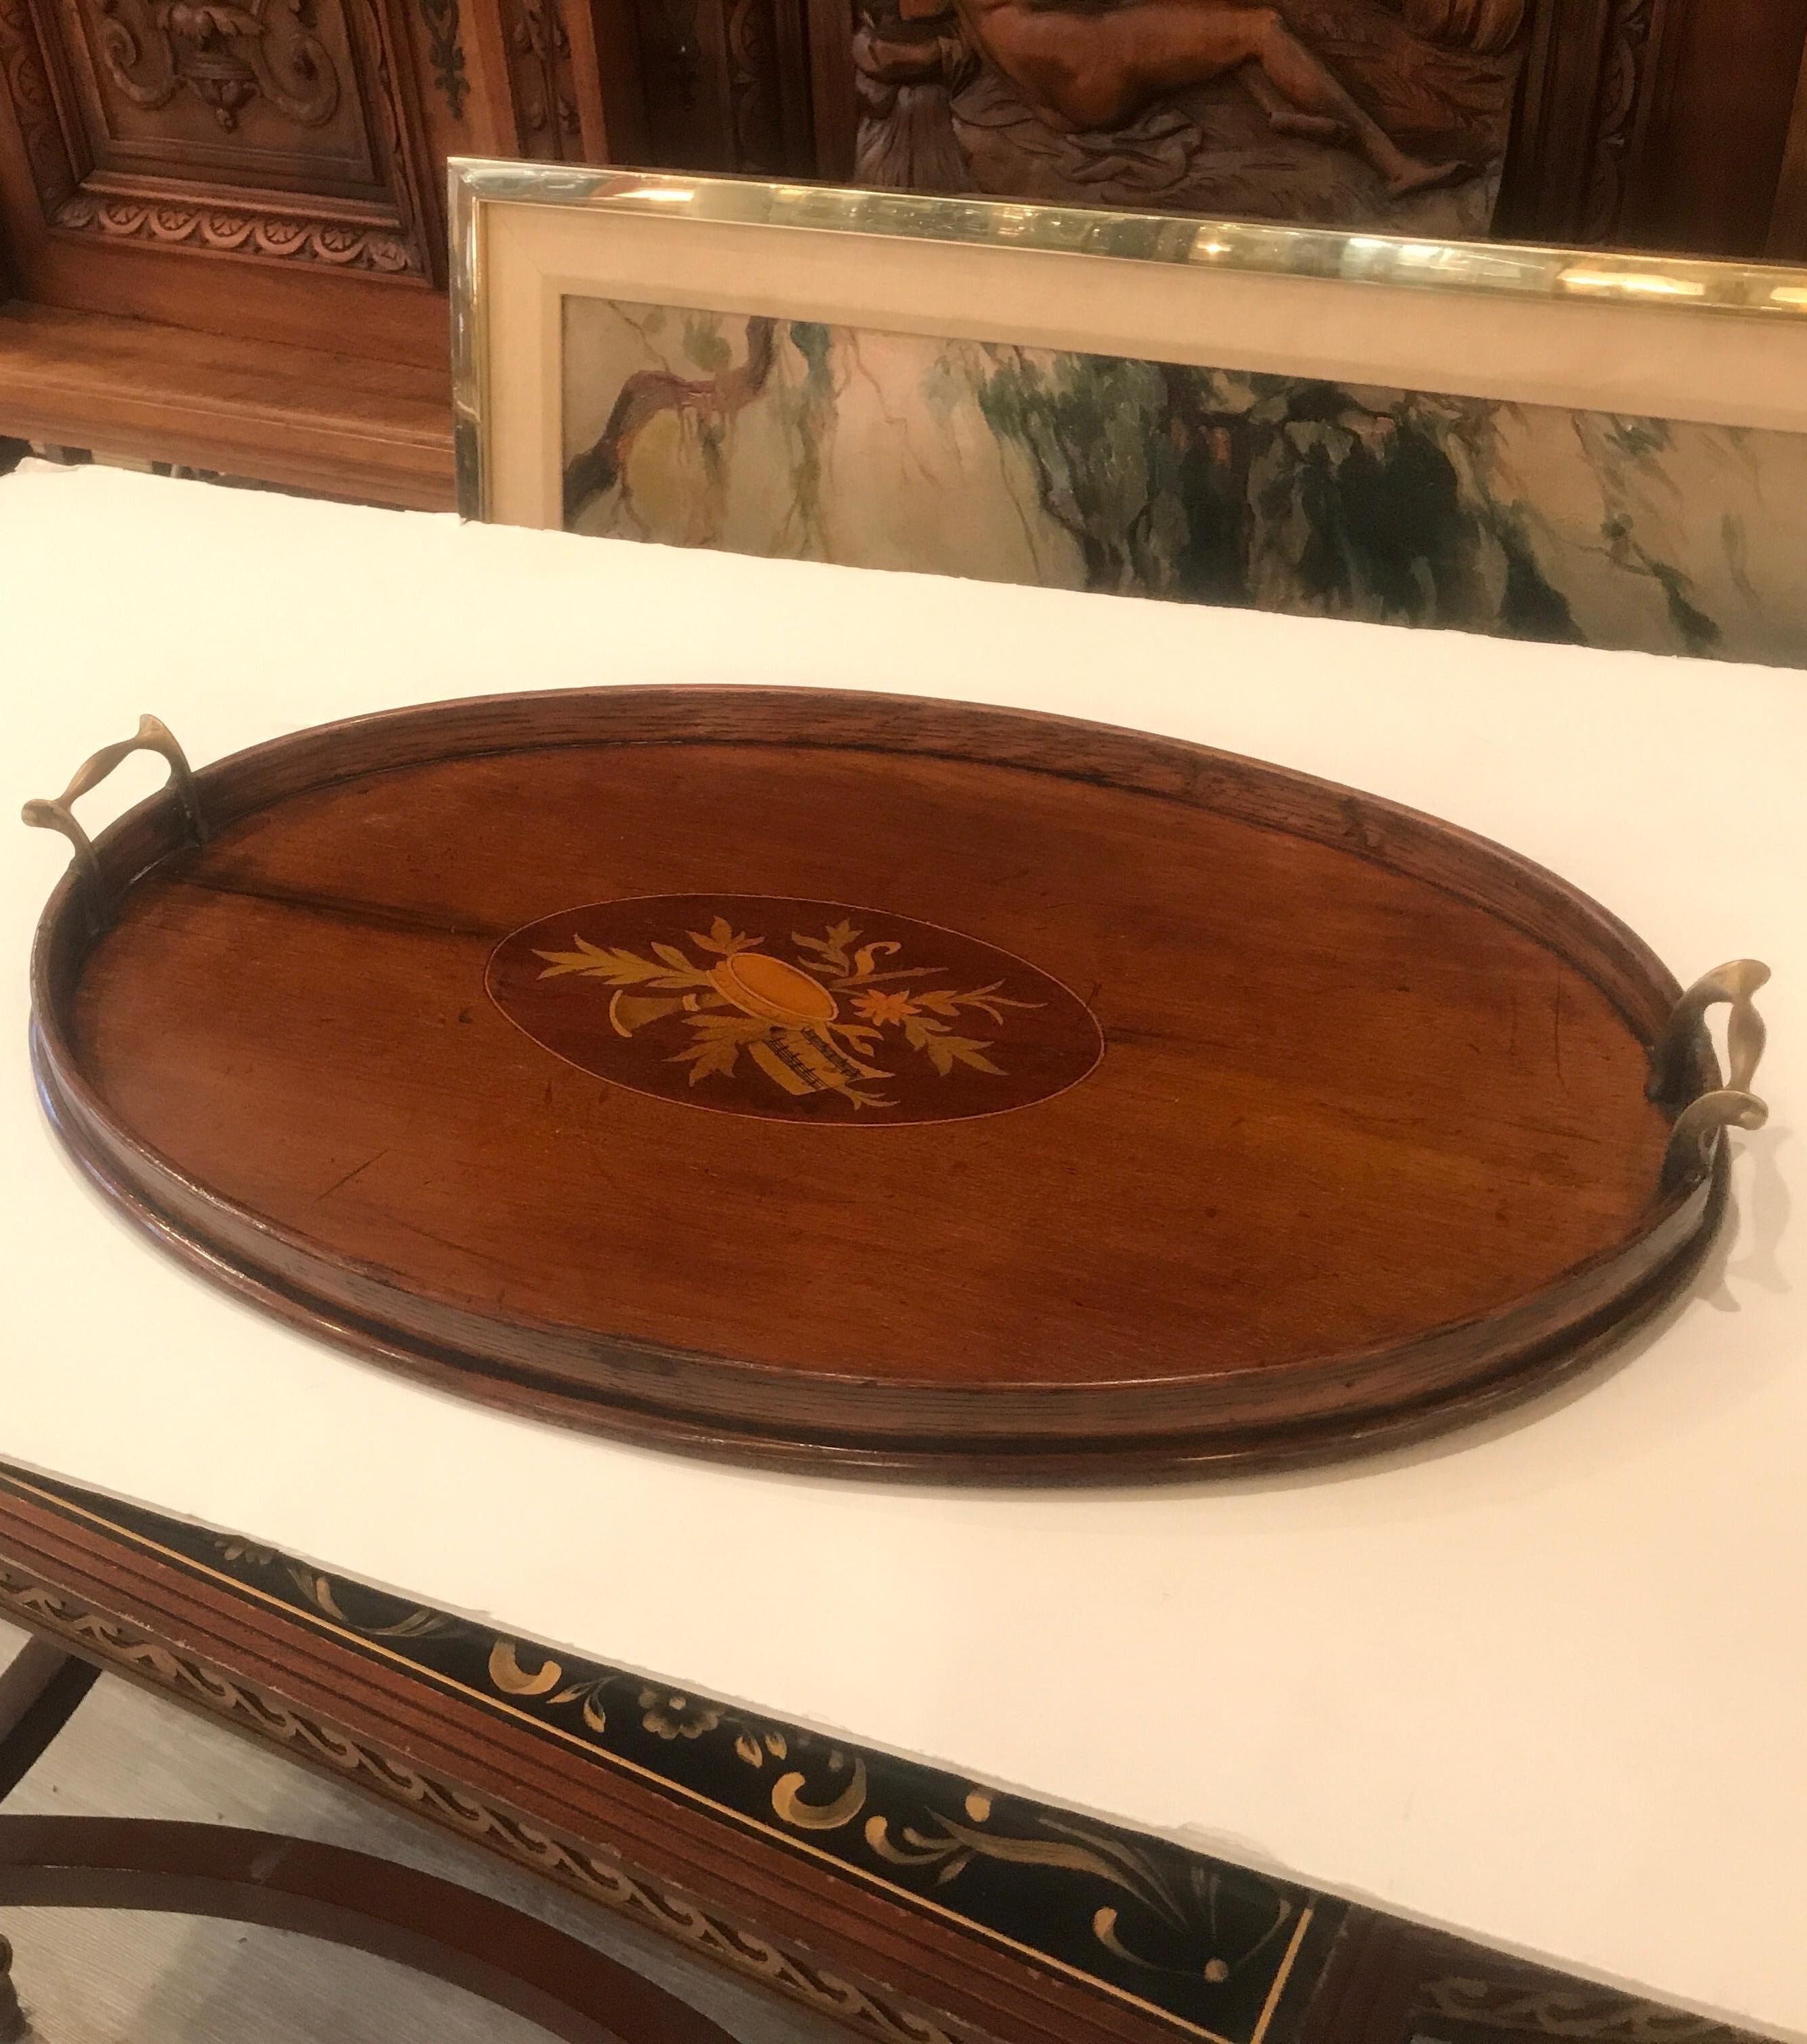 Elegant Edwardian English serving tray with inlaid cartouche. The wood gallery edge with brass handles, England Circa 1905.